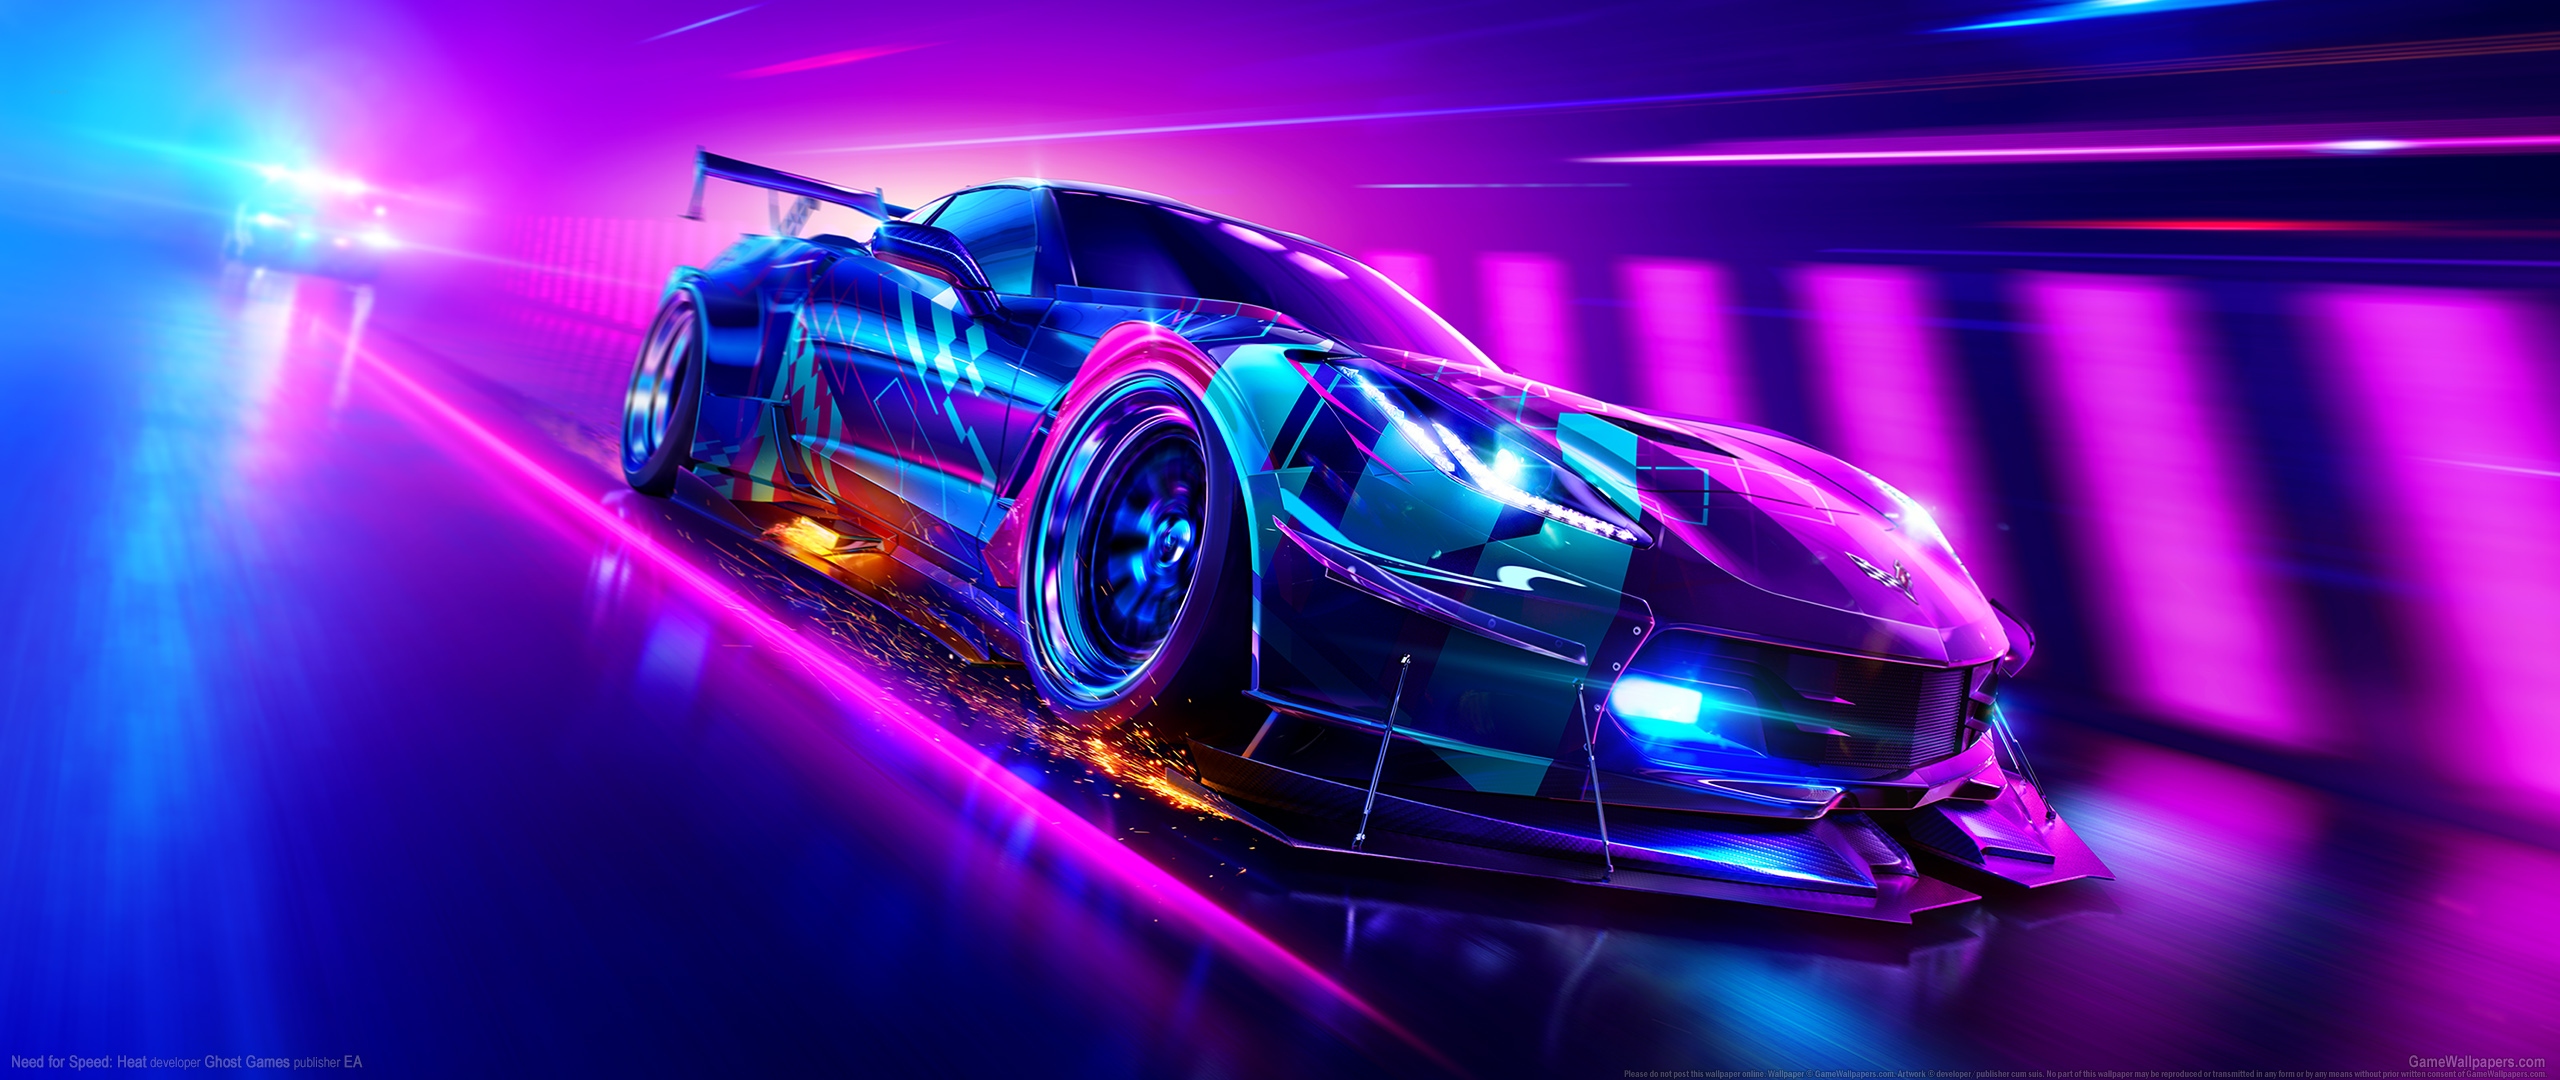 Need for Speed: Heat 2560x1080 wallpaper or background 03